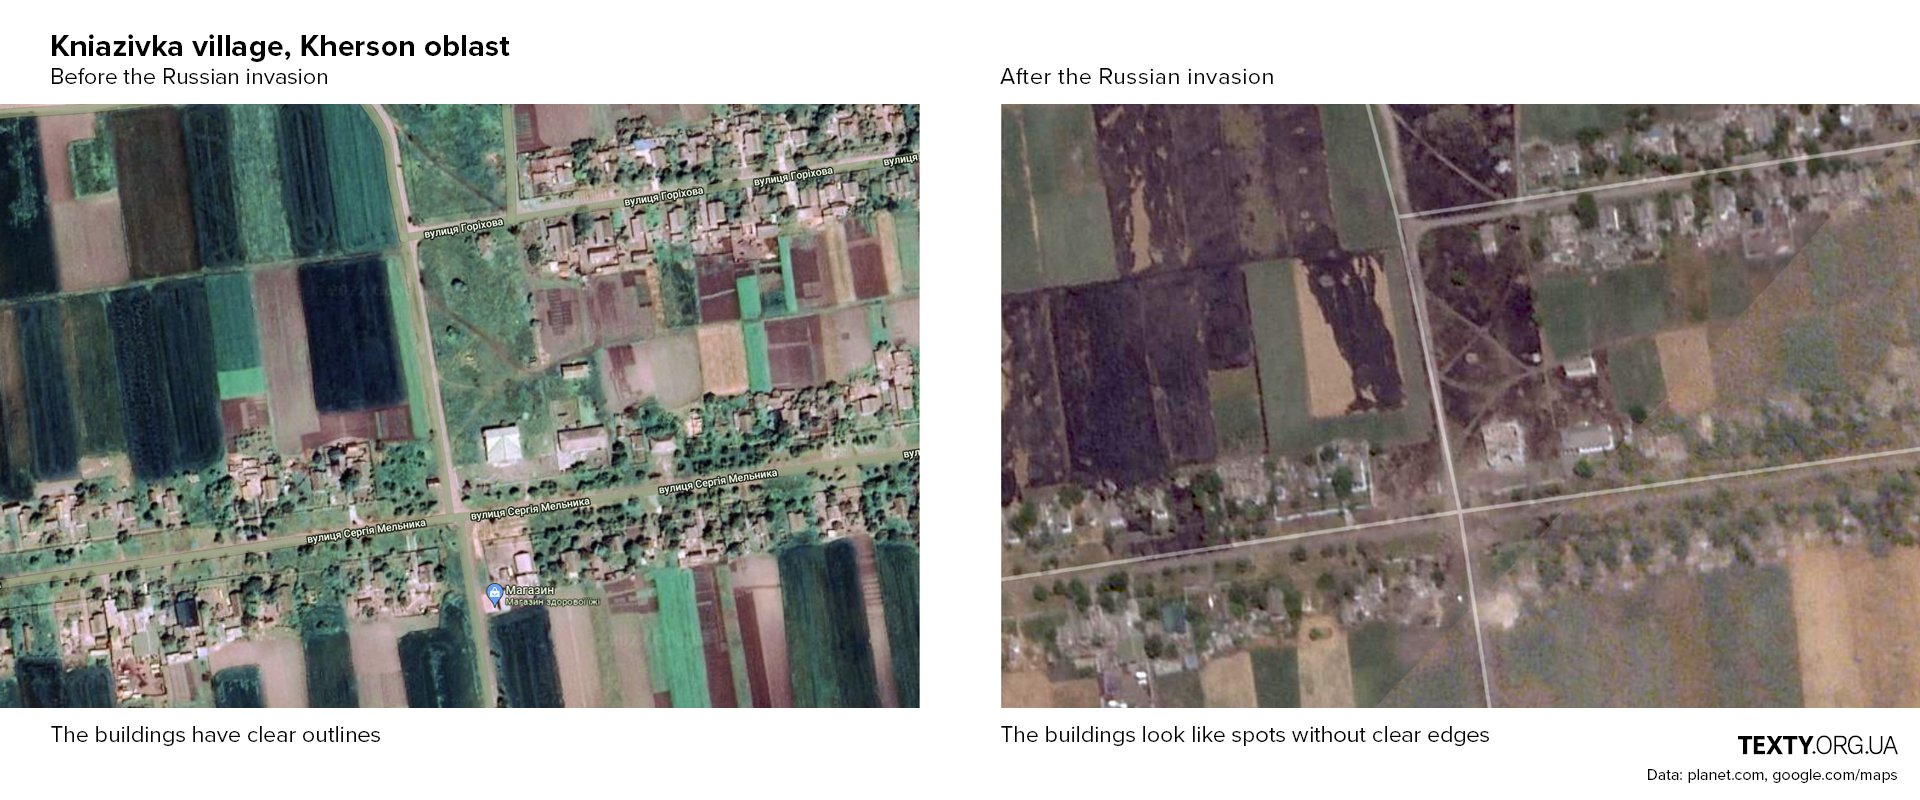 Kniazivka, before and after